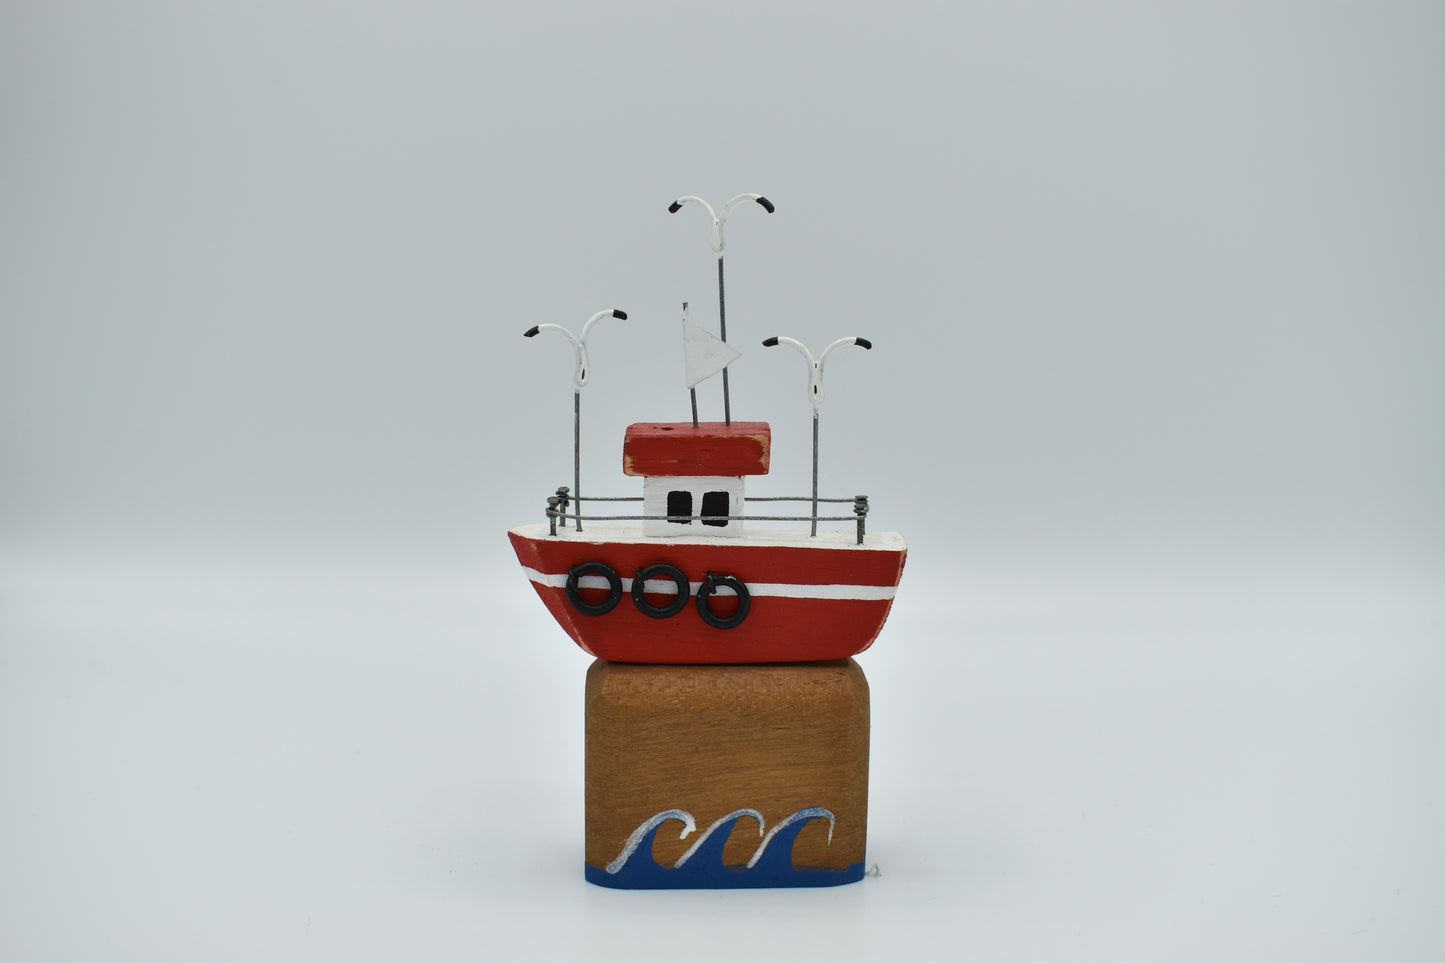 Boat and Seagulls Wooden Painted Ornament